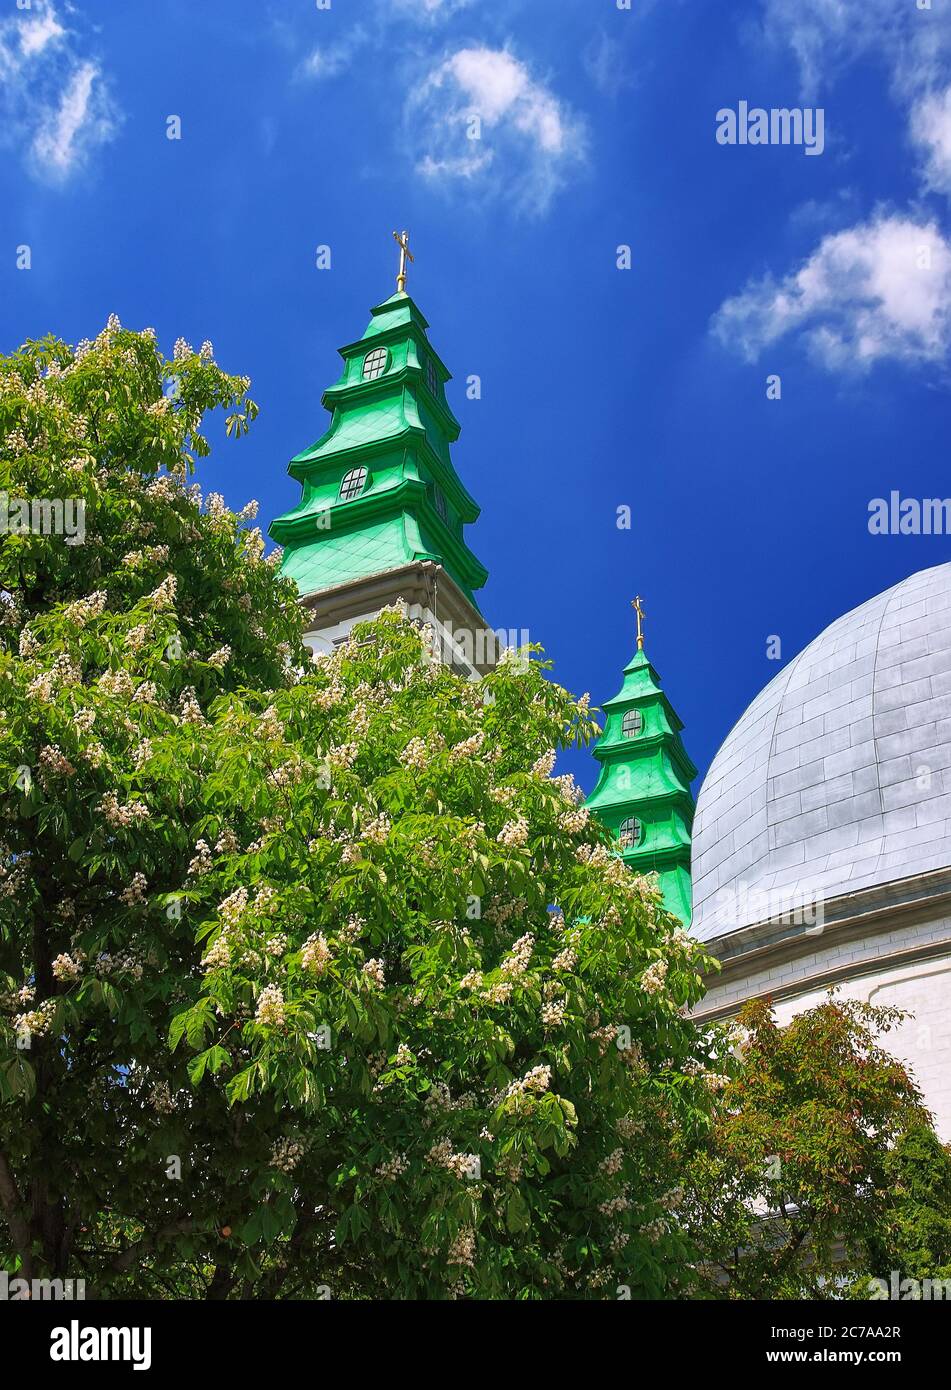 Cathedral belltowers and chesnut tree in blossom. Chessnut flowers Stock Photo